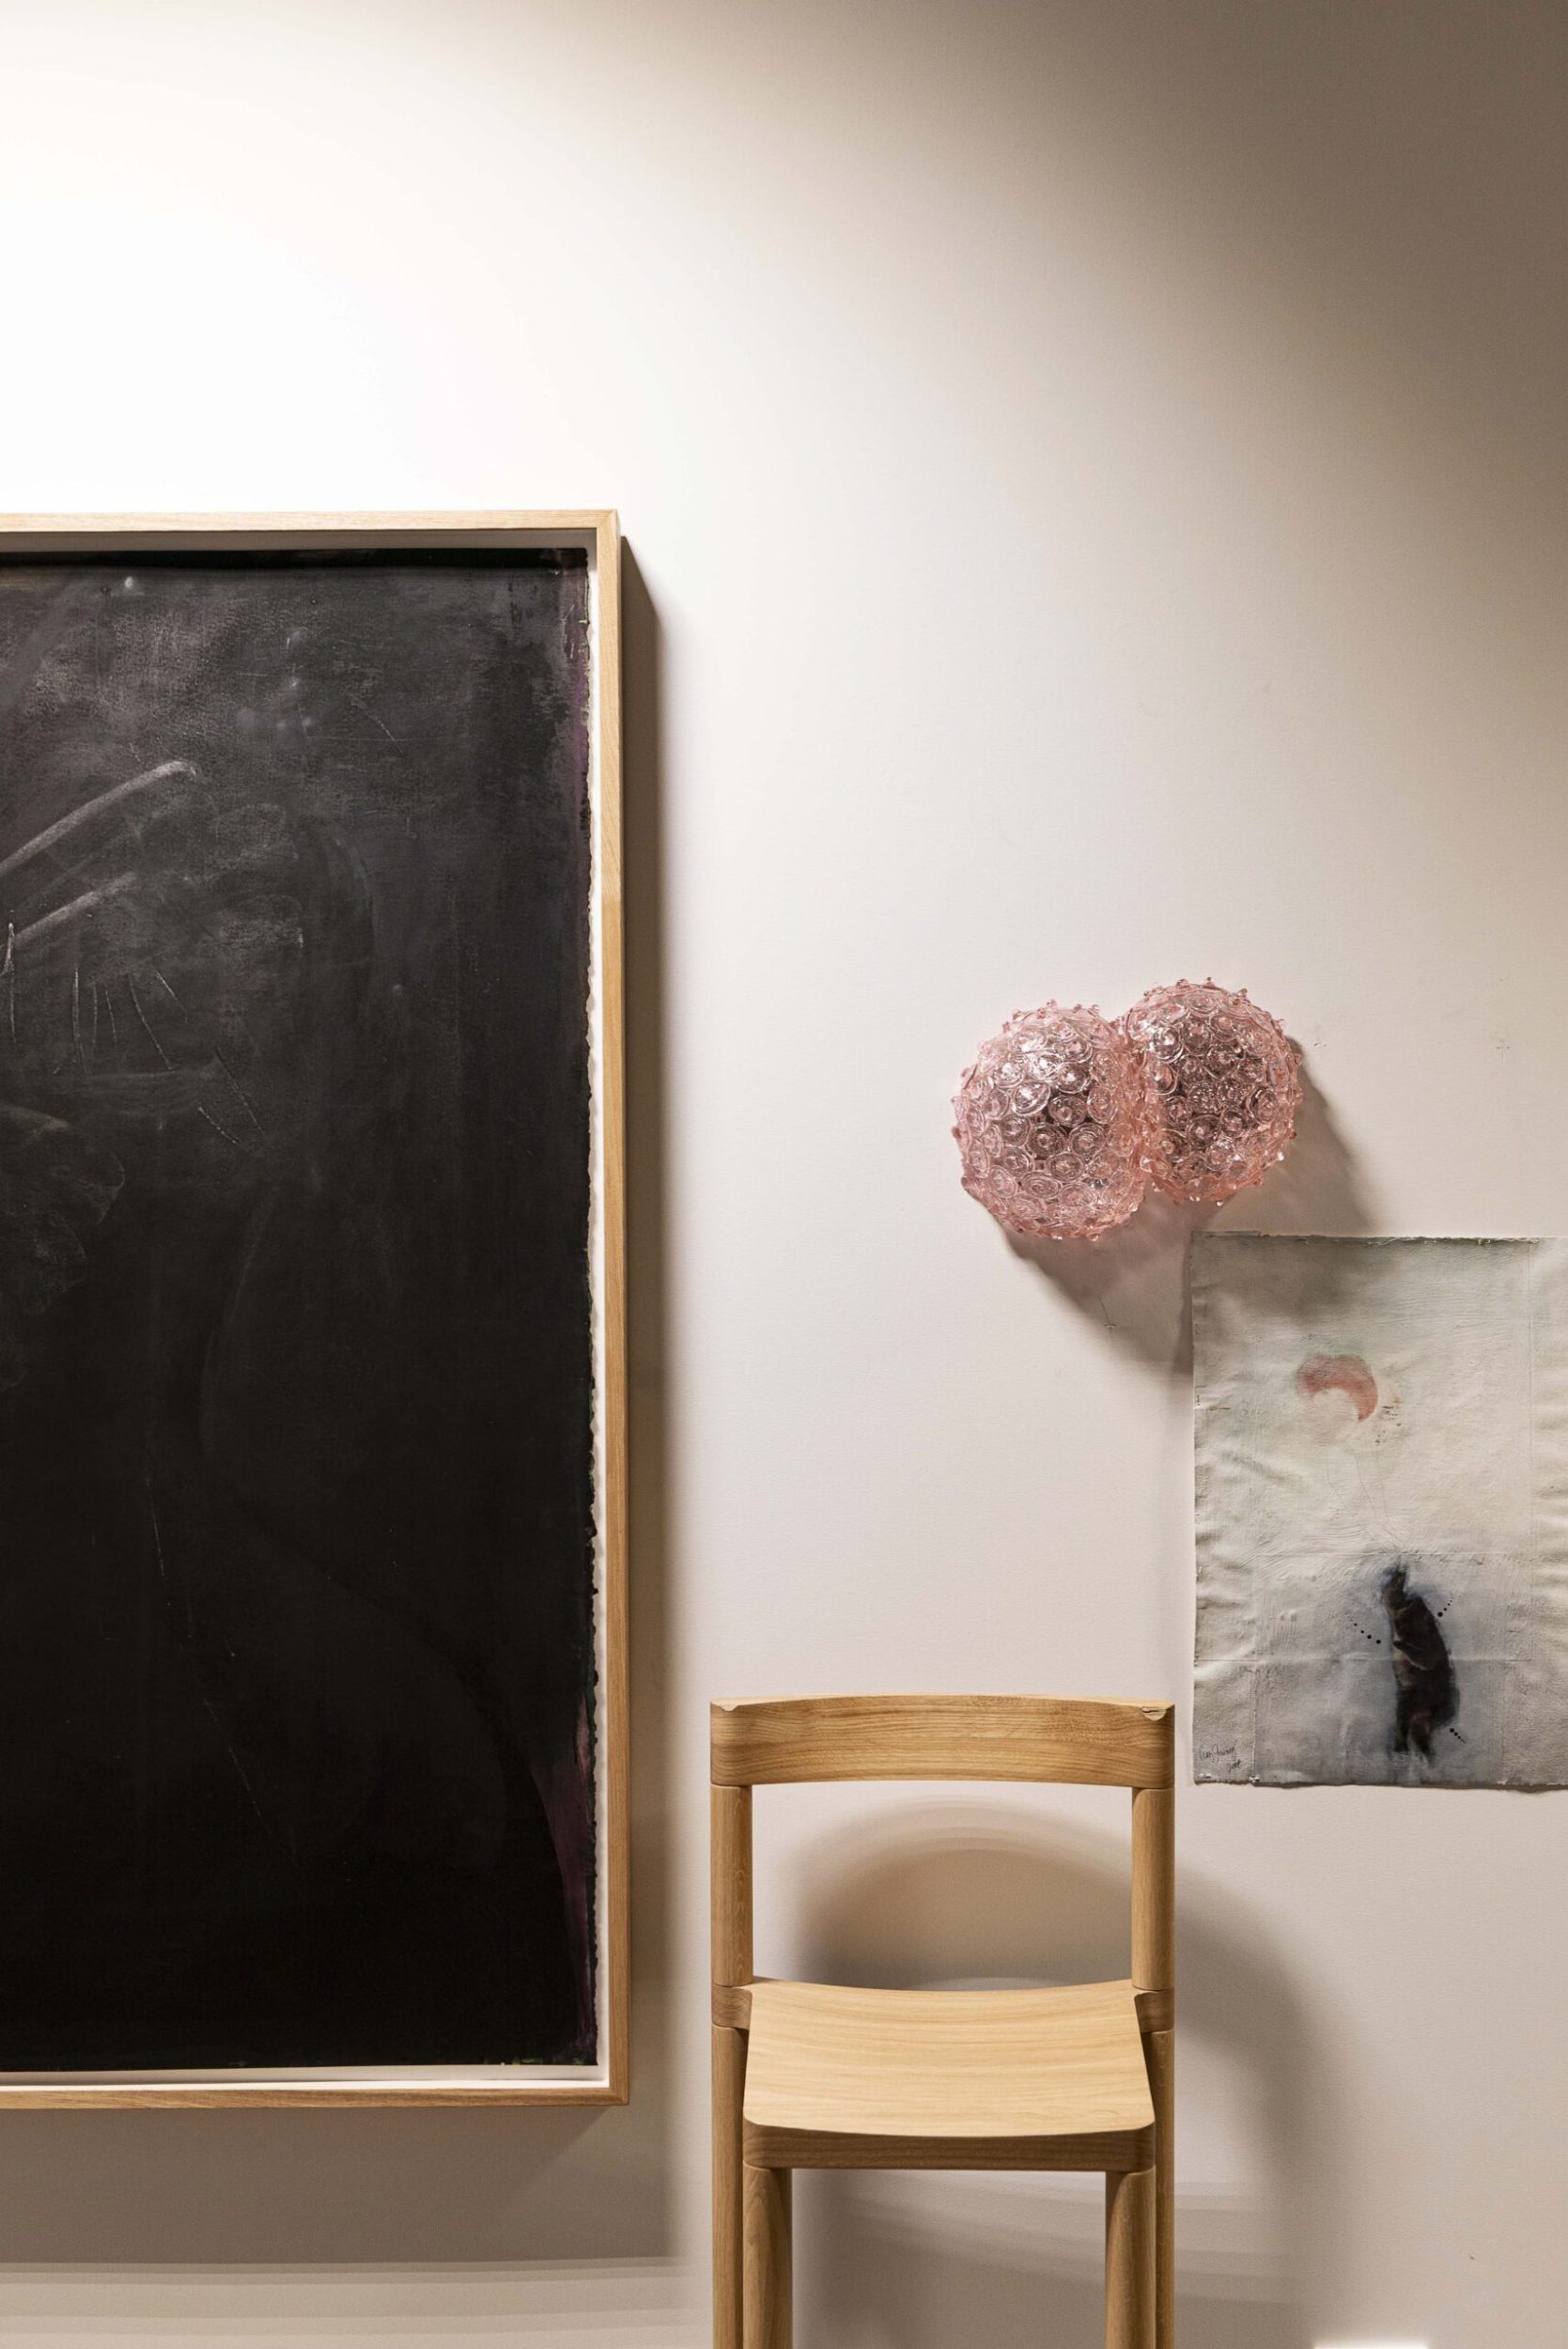 Black painting hangs next to wooden chair and pink bubble artwork